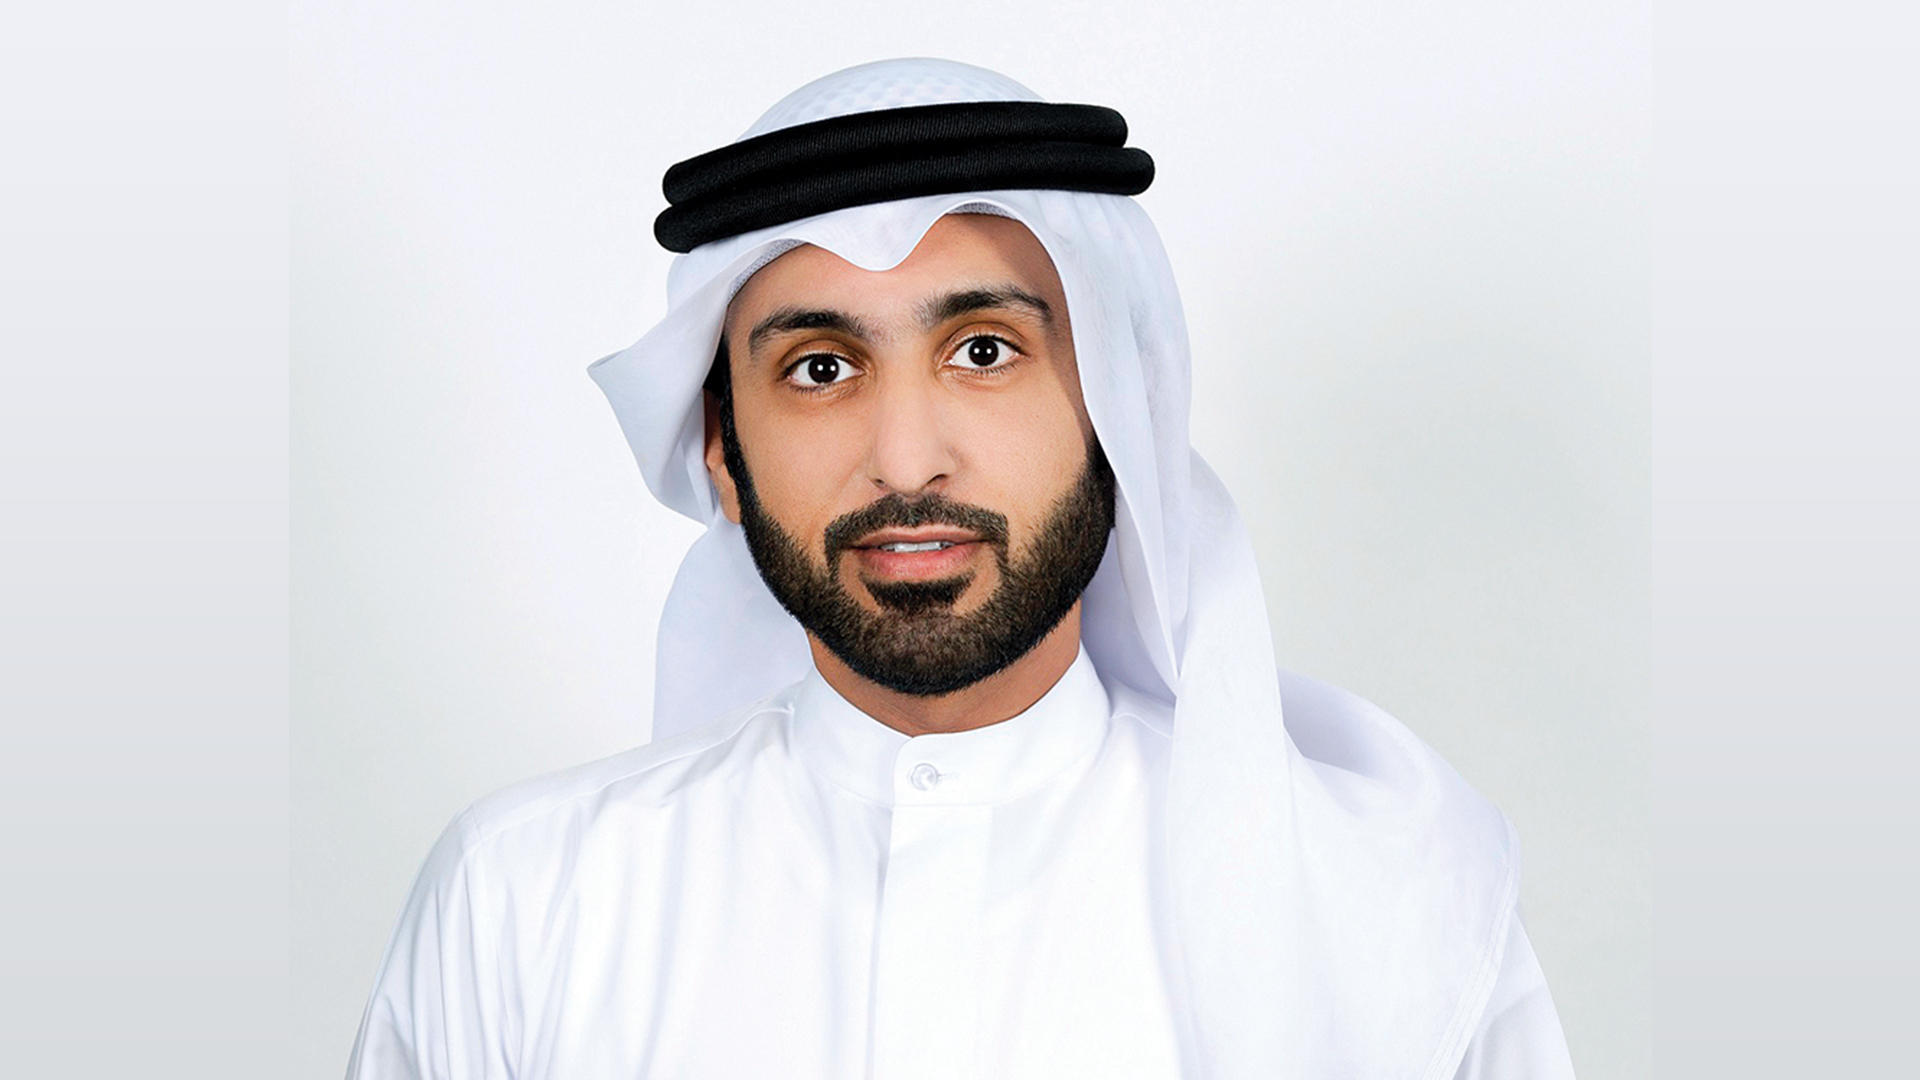 Khaled Al Qasimi: "Prevention and Safety" aspires to a safe society free from dangers